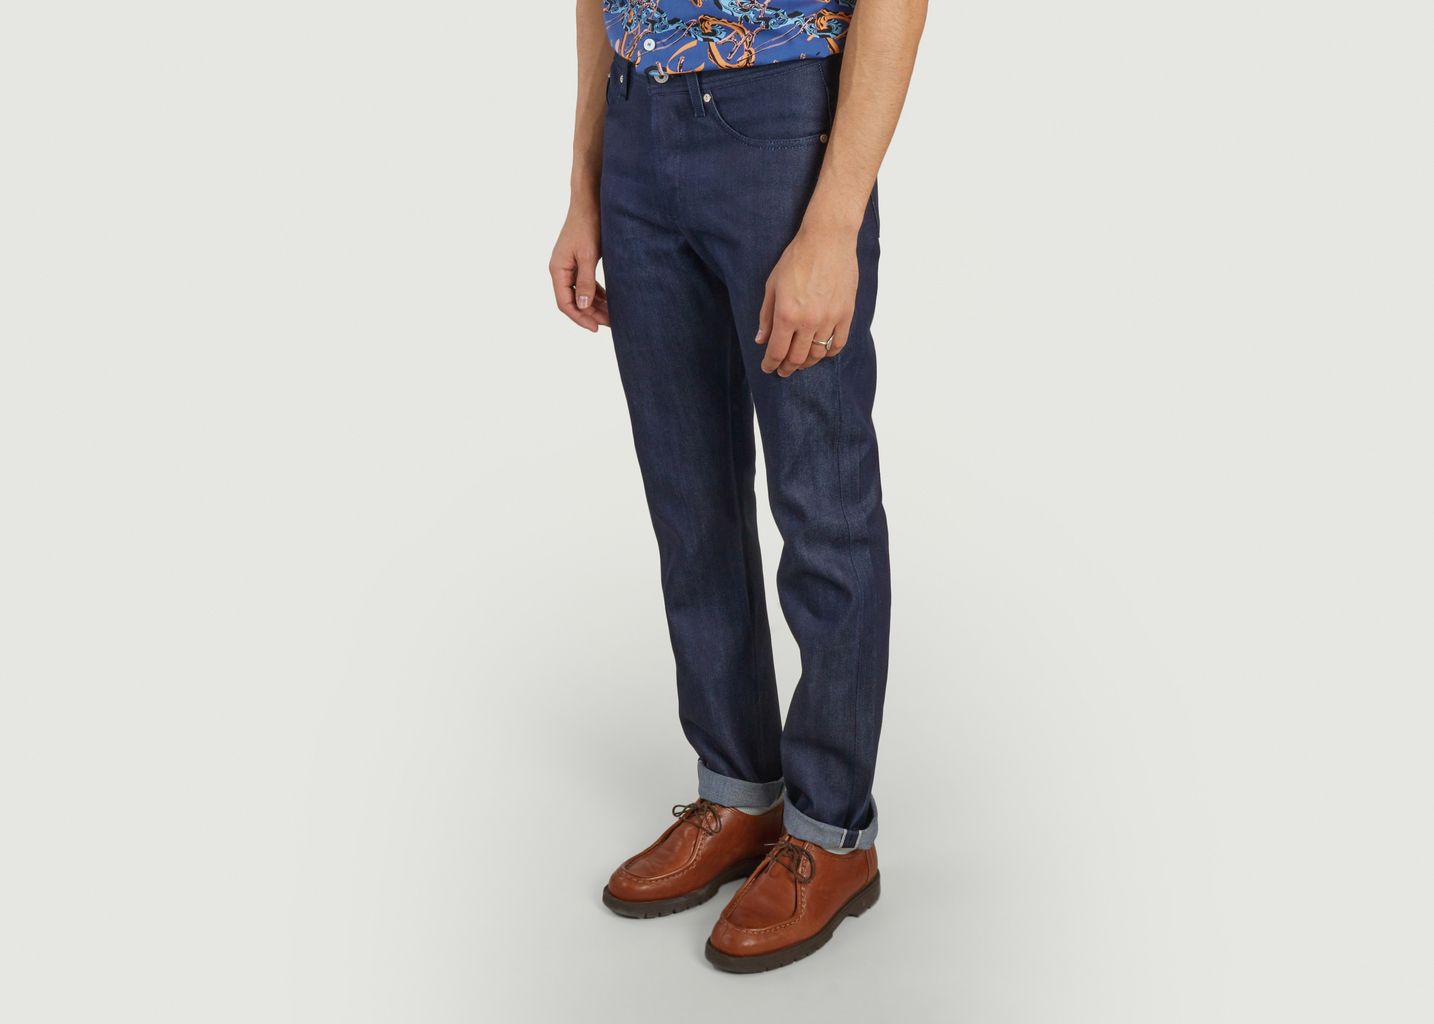 Jeans Weird Guy Spring Garden Selvedge - Naked and Famous